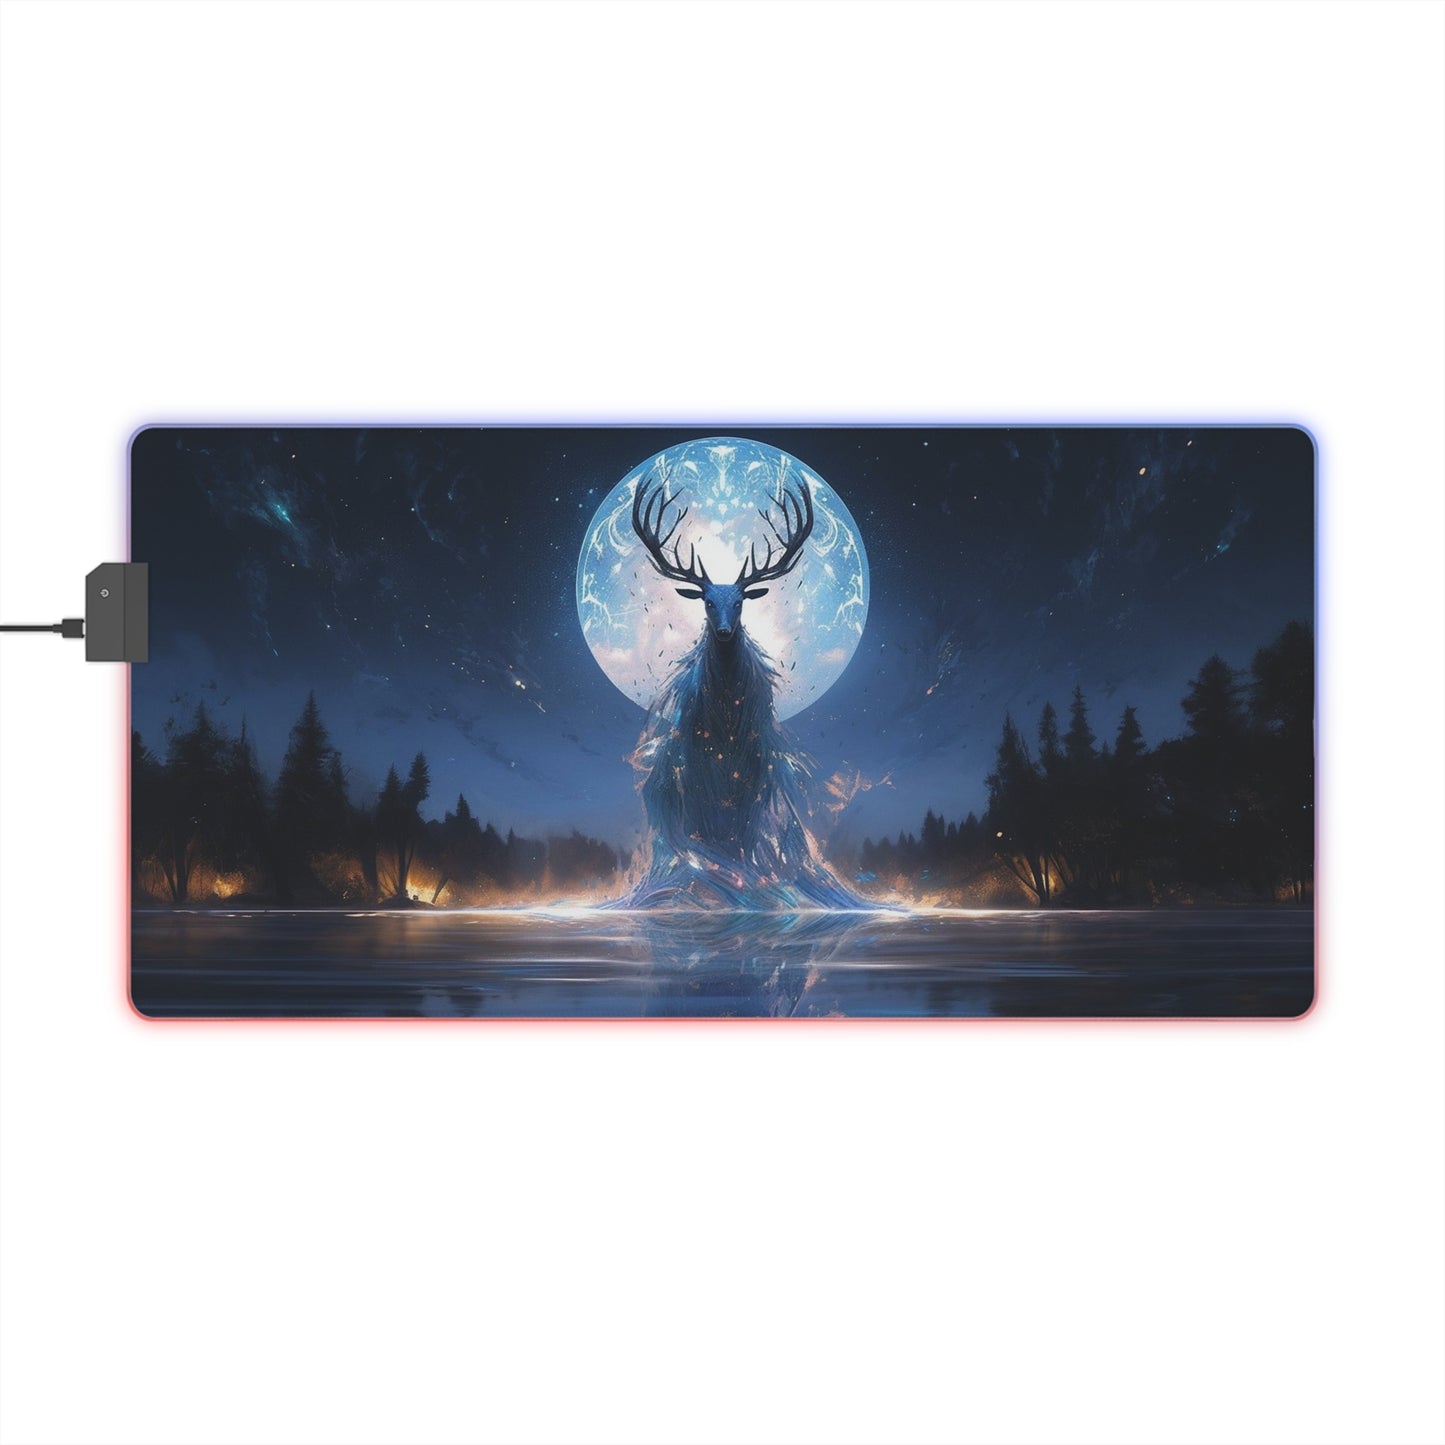 Spectral Deer LED Gaming Mouse Pad